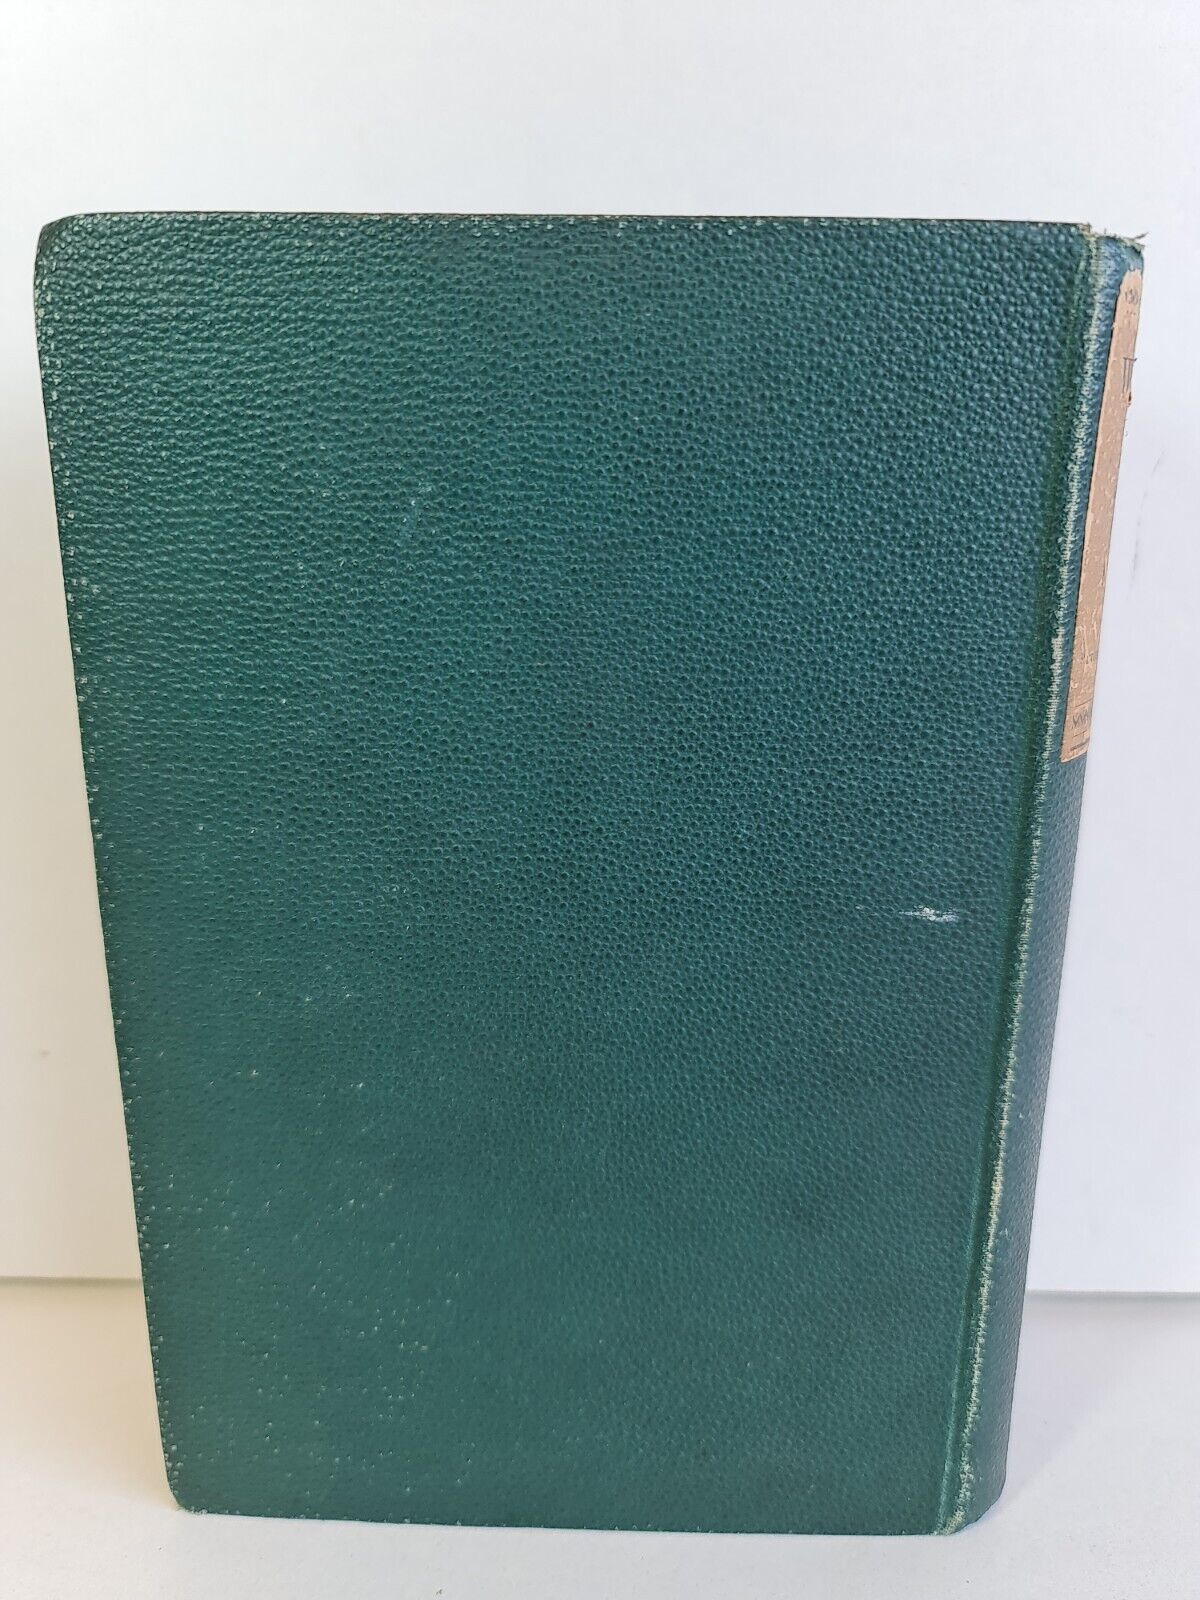 Walden by Henry D. Thoreau (1884 - First British Edition)